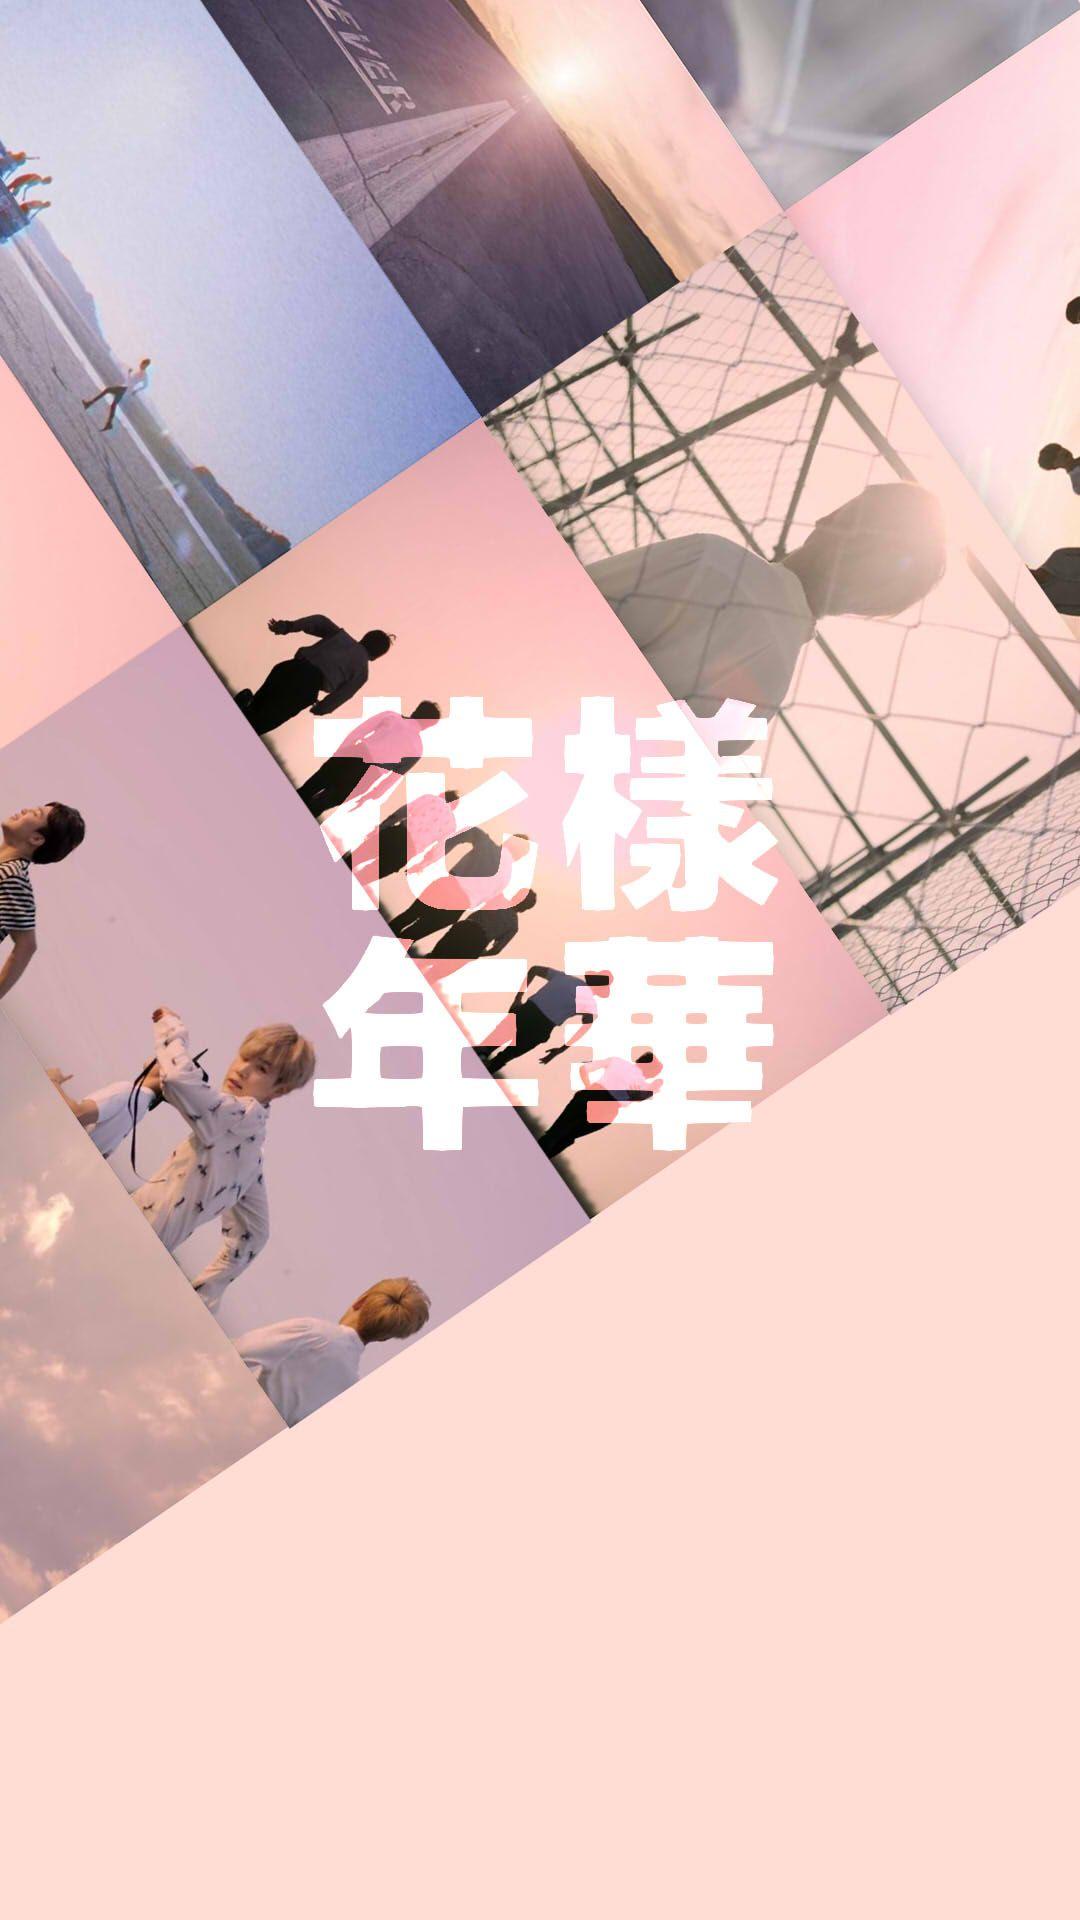 you never walk alone, sleepysaint: !!BTS Young Forever Wallpaper